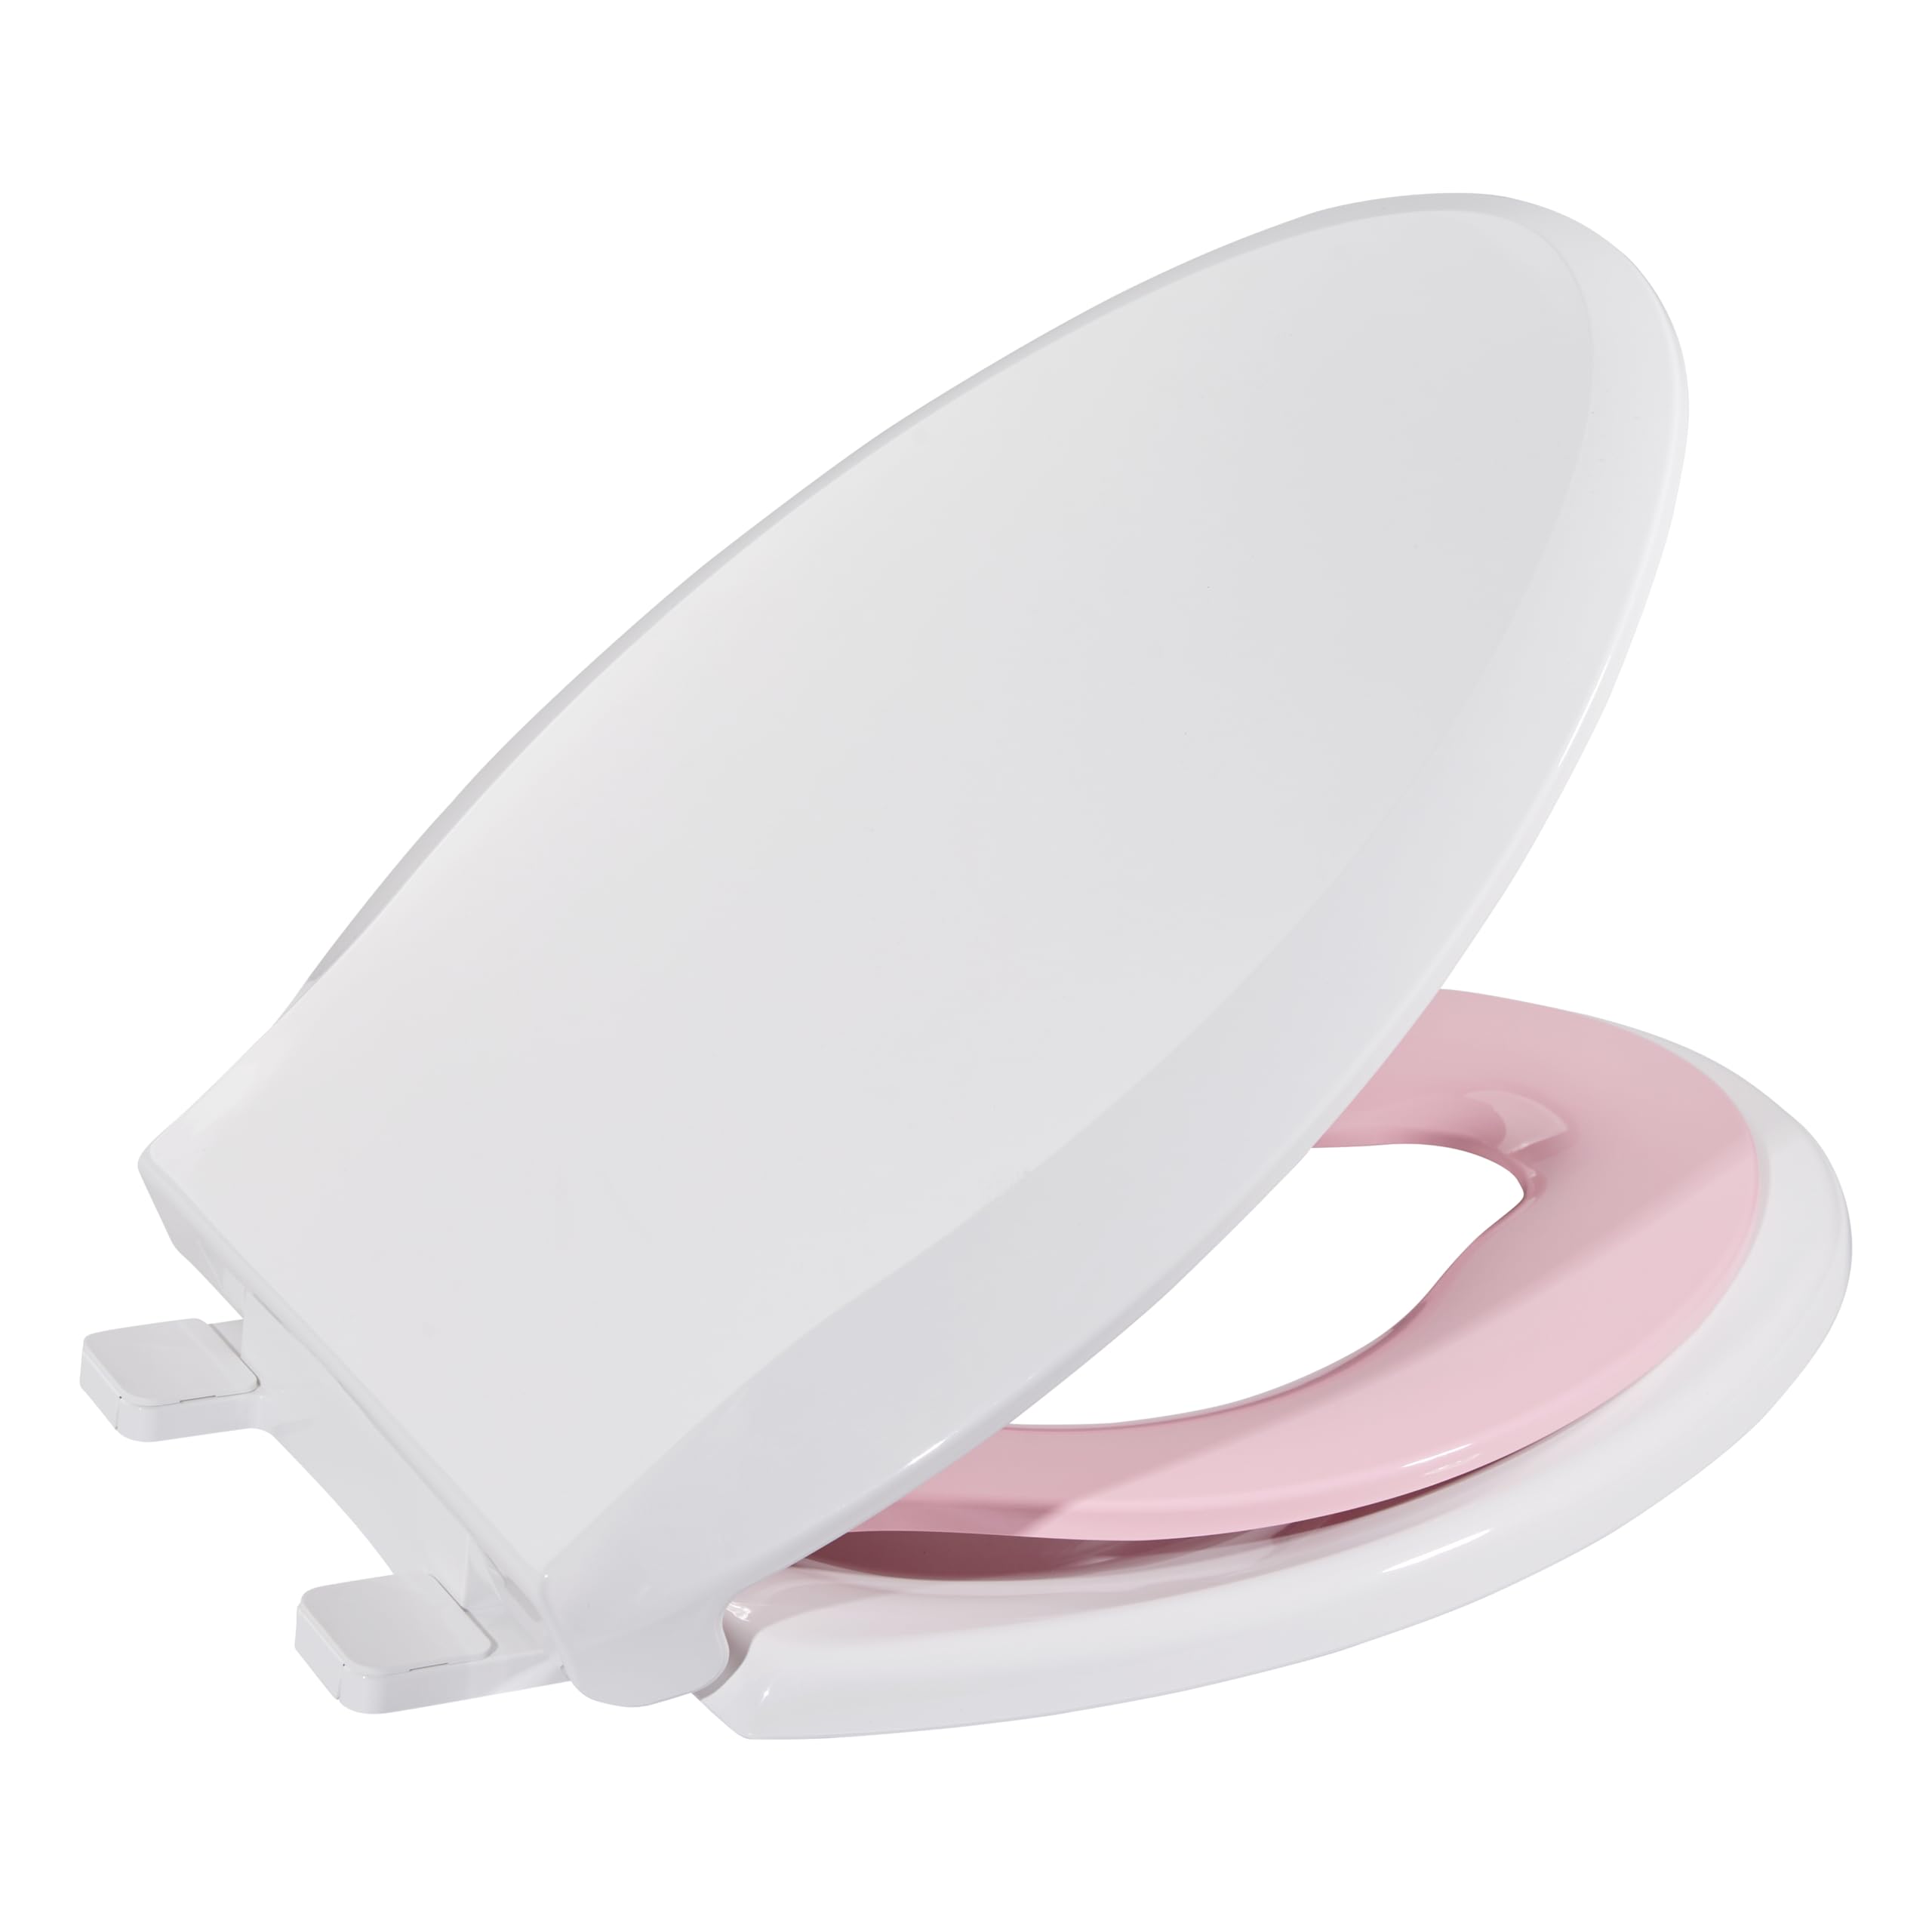 GAOMON Toilet Seat, Elongated Toilet Seat with Toddler Seat Built in, Potty Training Toilet Seat Elongated Fits Both Adult and Child, with Slow Close and Magnets- Elongated(Pink and White)